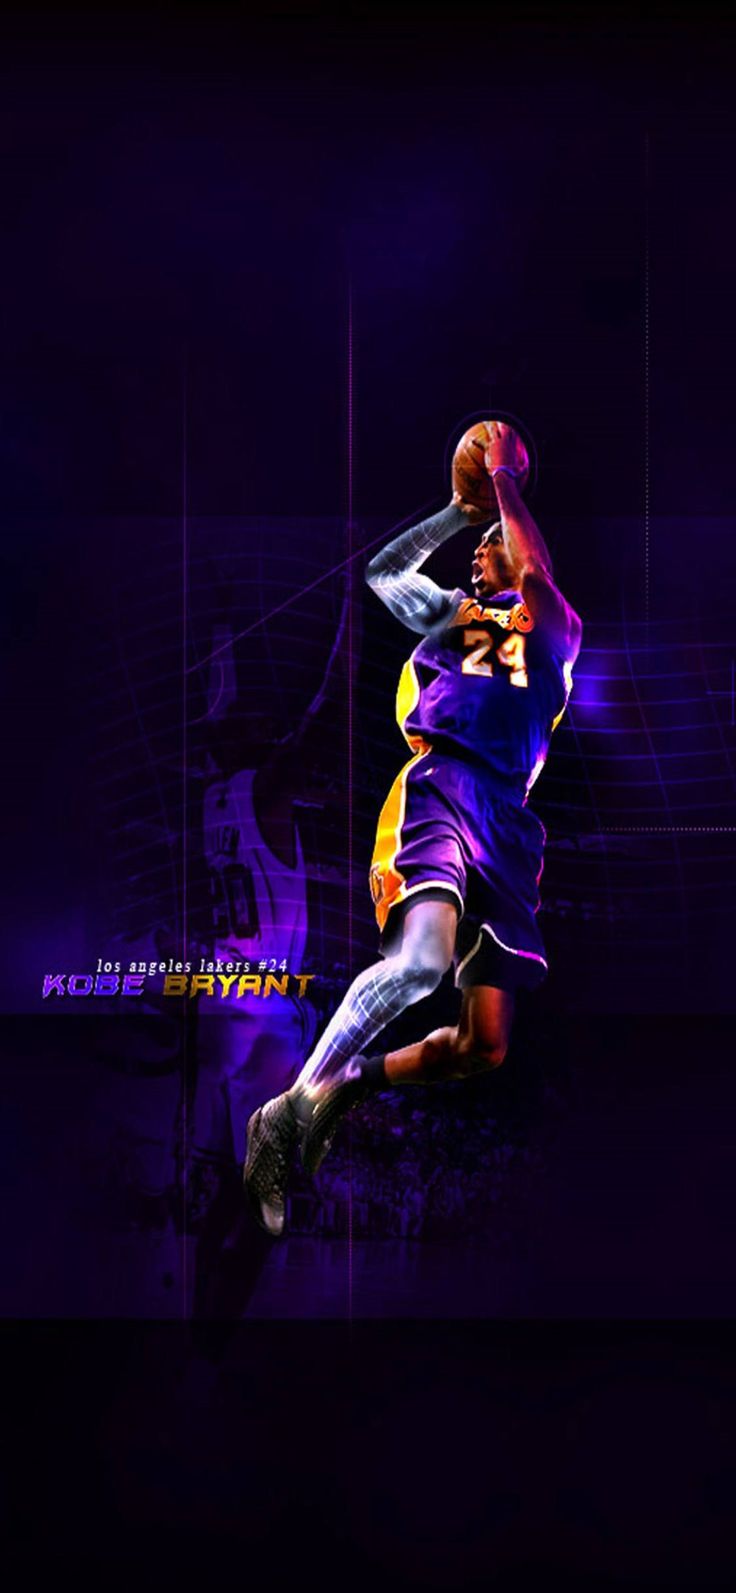 Free download the kobe bryant wallpaper , beaty your iphone. #kobe bryant #trends #Wall. Kobe bryant wallpaper, Kobe bryant iphone wallpaper, Kobe bryant picture